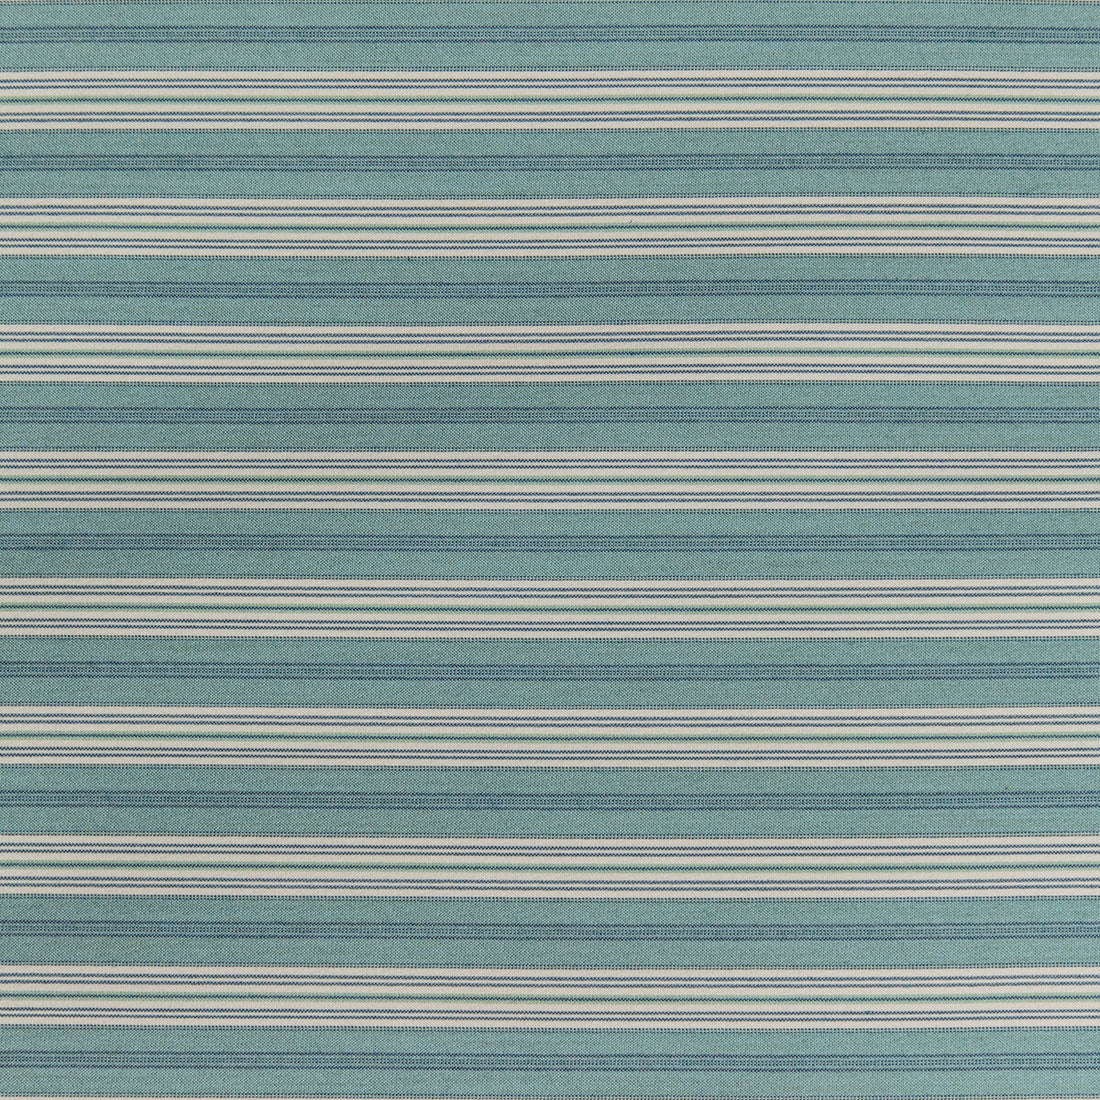 Hull Stripe fabric in lagoon color - pattern 35827.13.0 - by Kravet Design in the Indoor / Outdoor collection